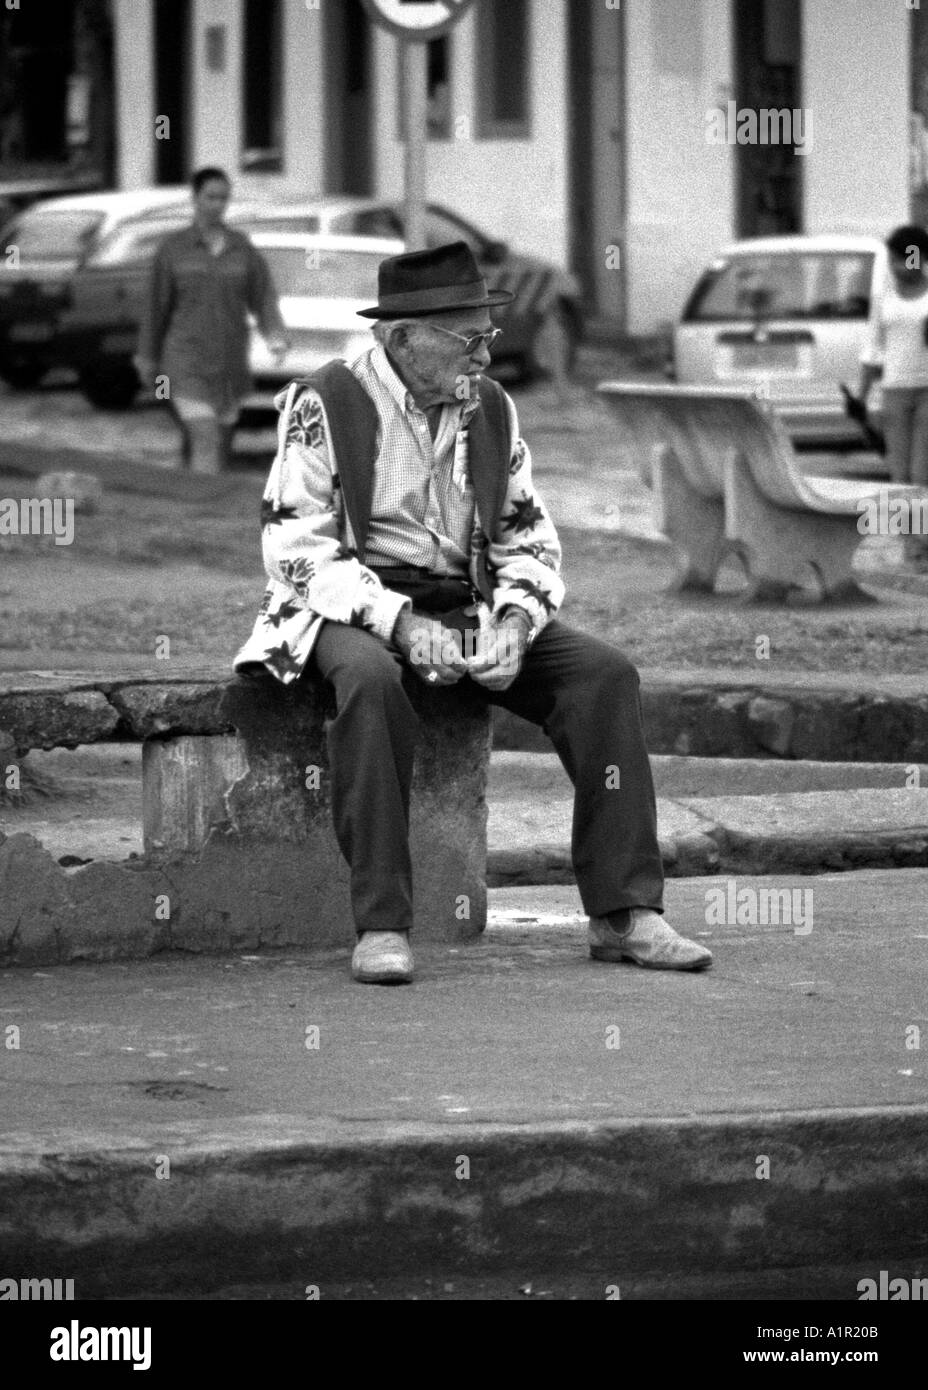 Senile man sitting outdoor on public bench waiting for time & people to go by Ciudad del Este Paraguay South Latin America Stock Photo